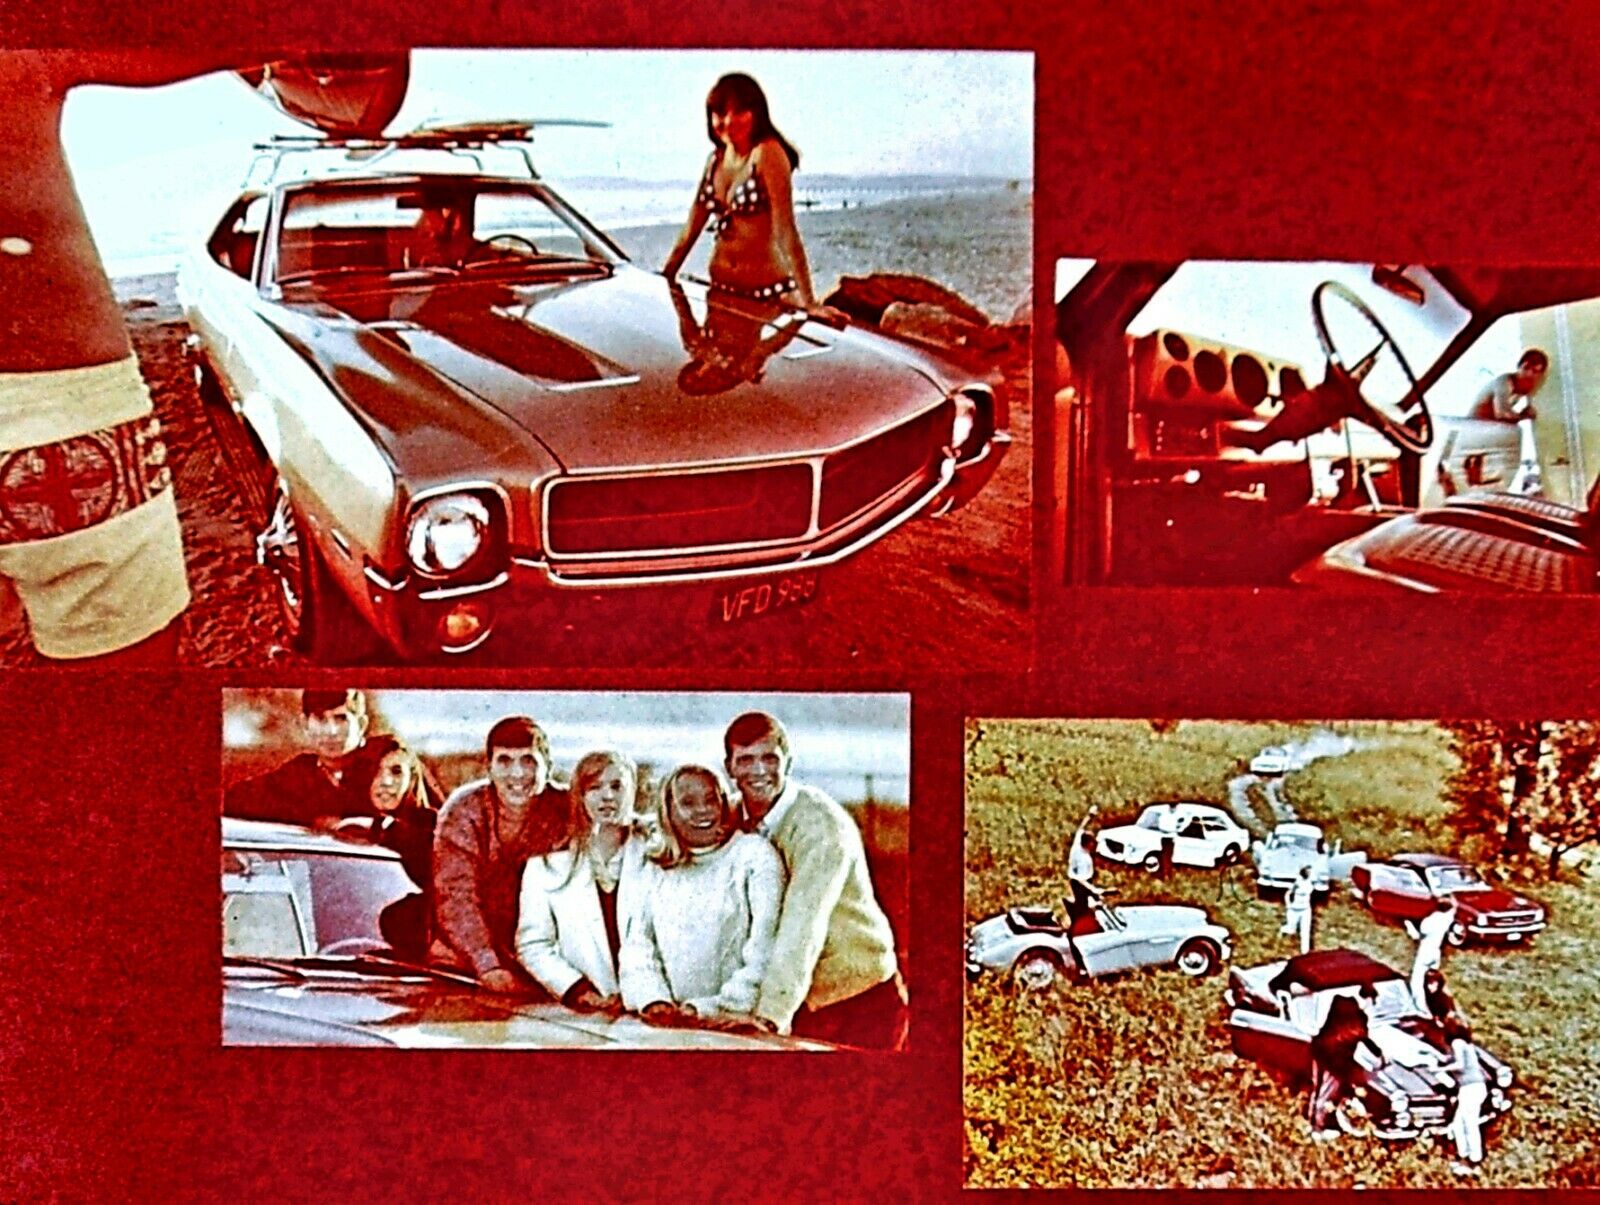 1969 AMC - AMX - Javelin Sell Young Film - CD MP4 OR DVD Format